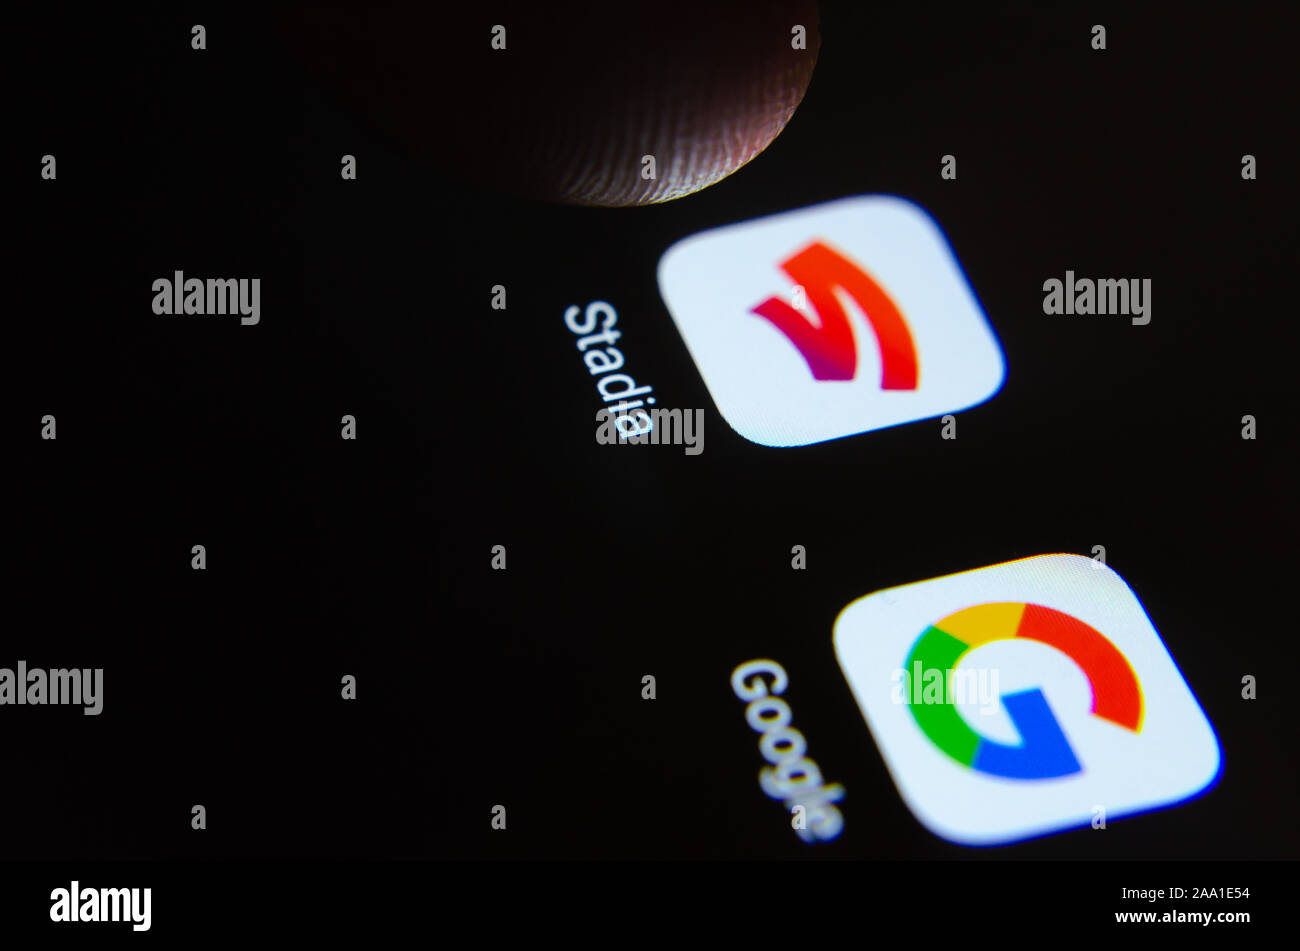 Stadia and Google apps on a smartphone screen and finger launching Stadia. Stock Photo